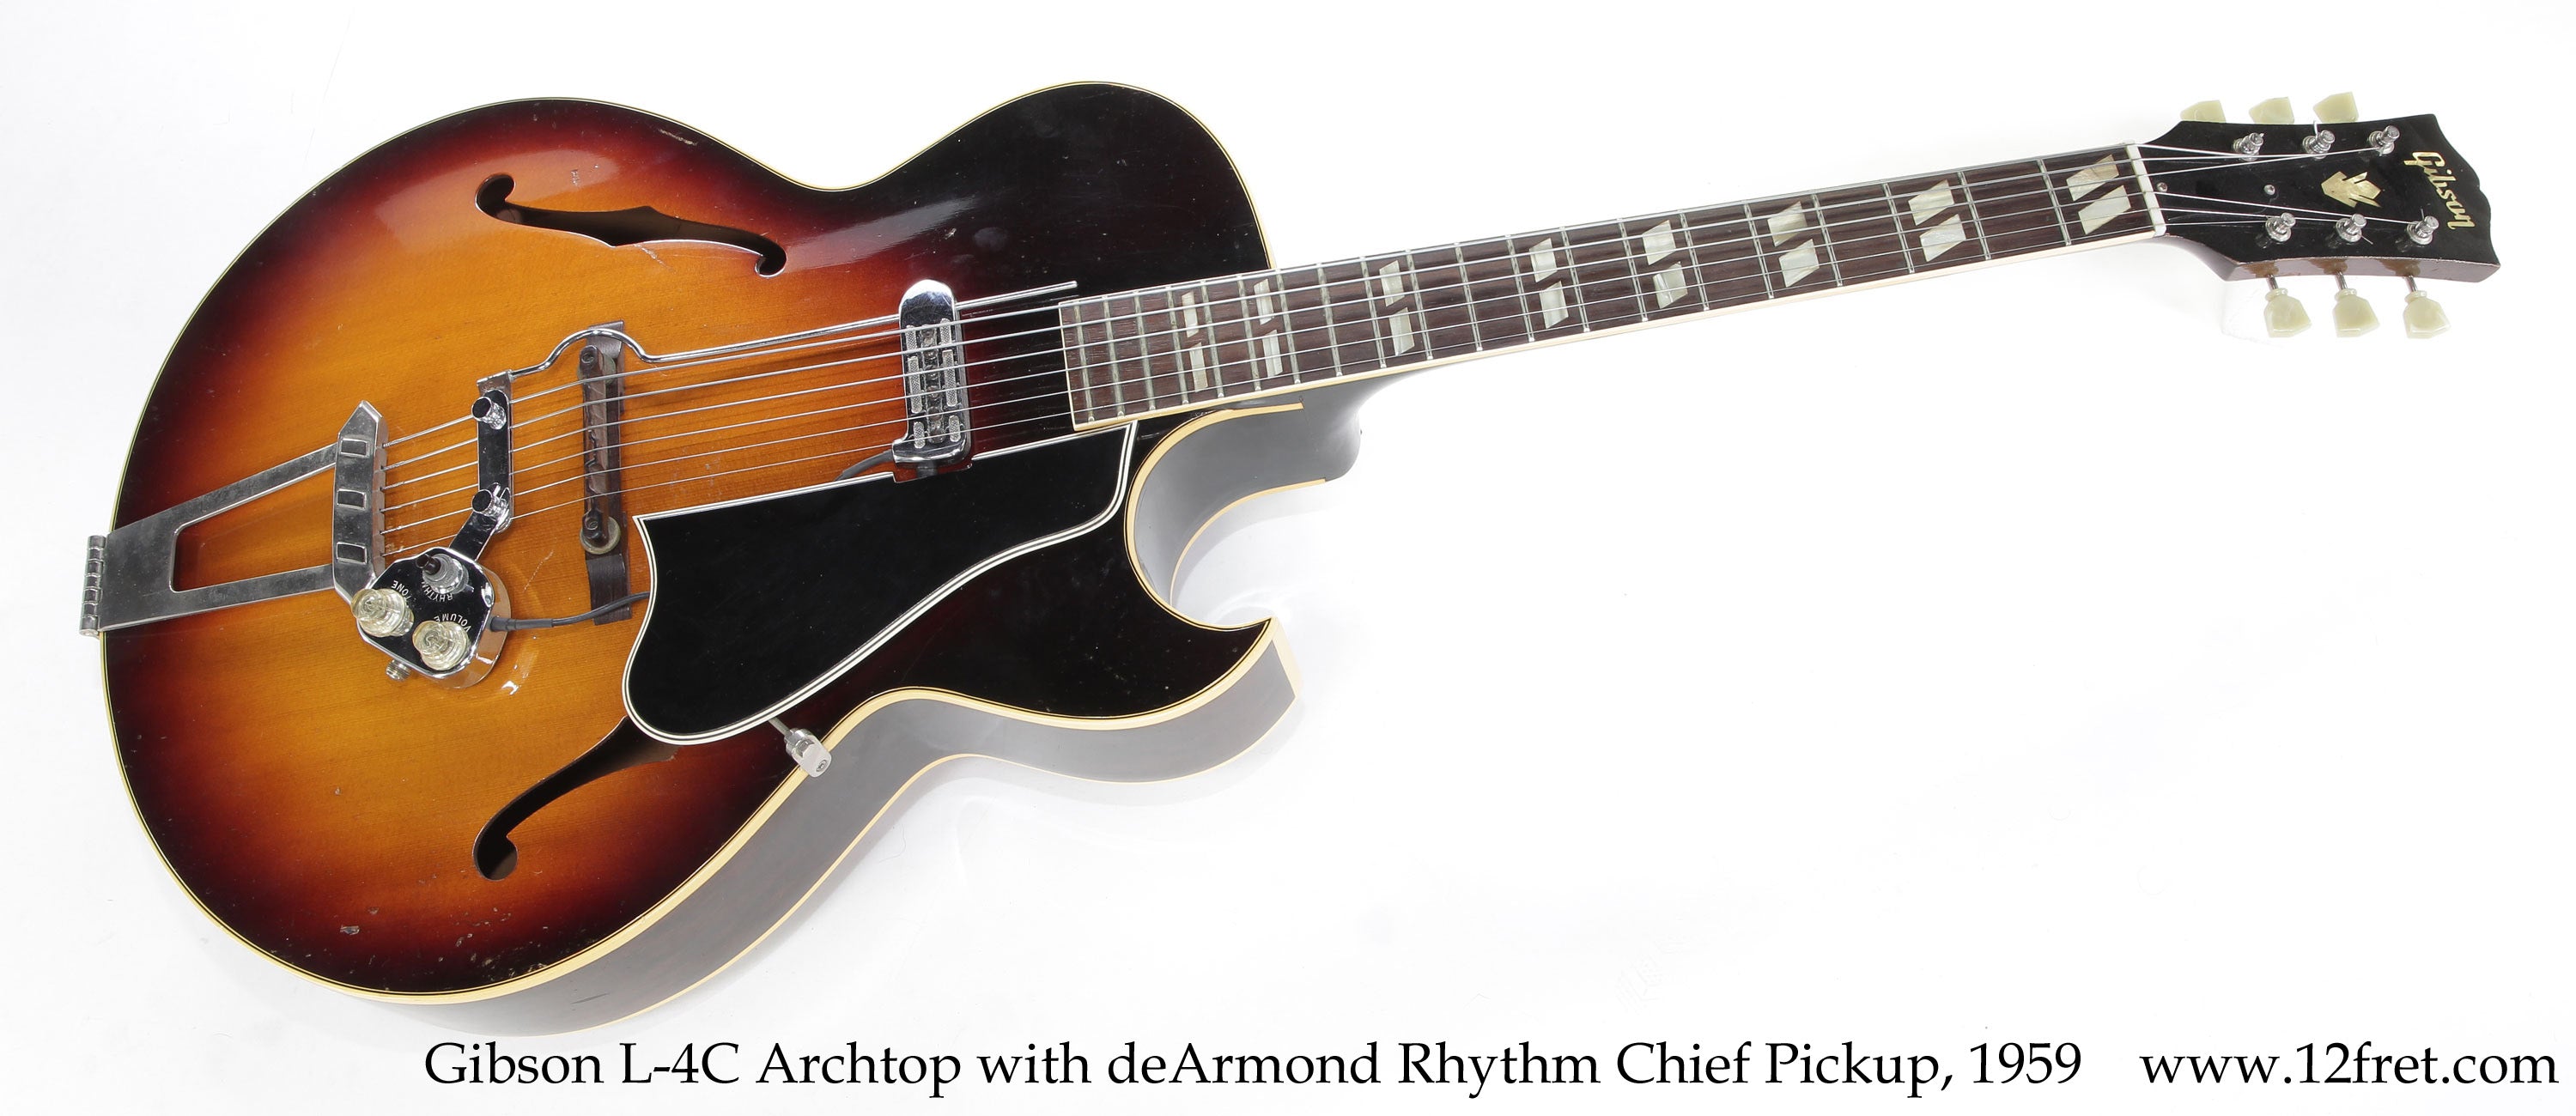 Gibson L-4C Archtop with DeArmond Rhythm Chief Pickup, 1959  - The Twelfth Fret